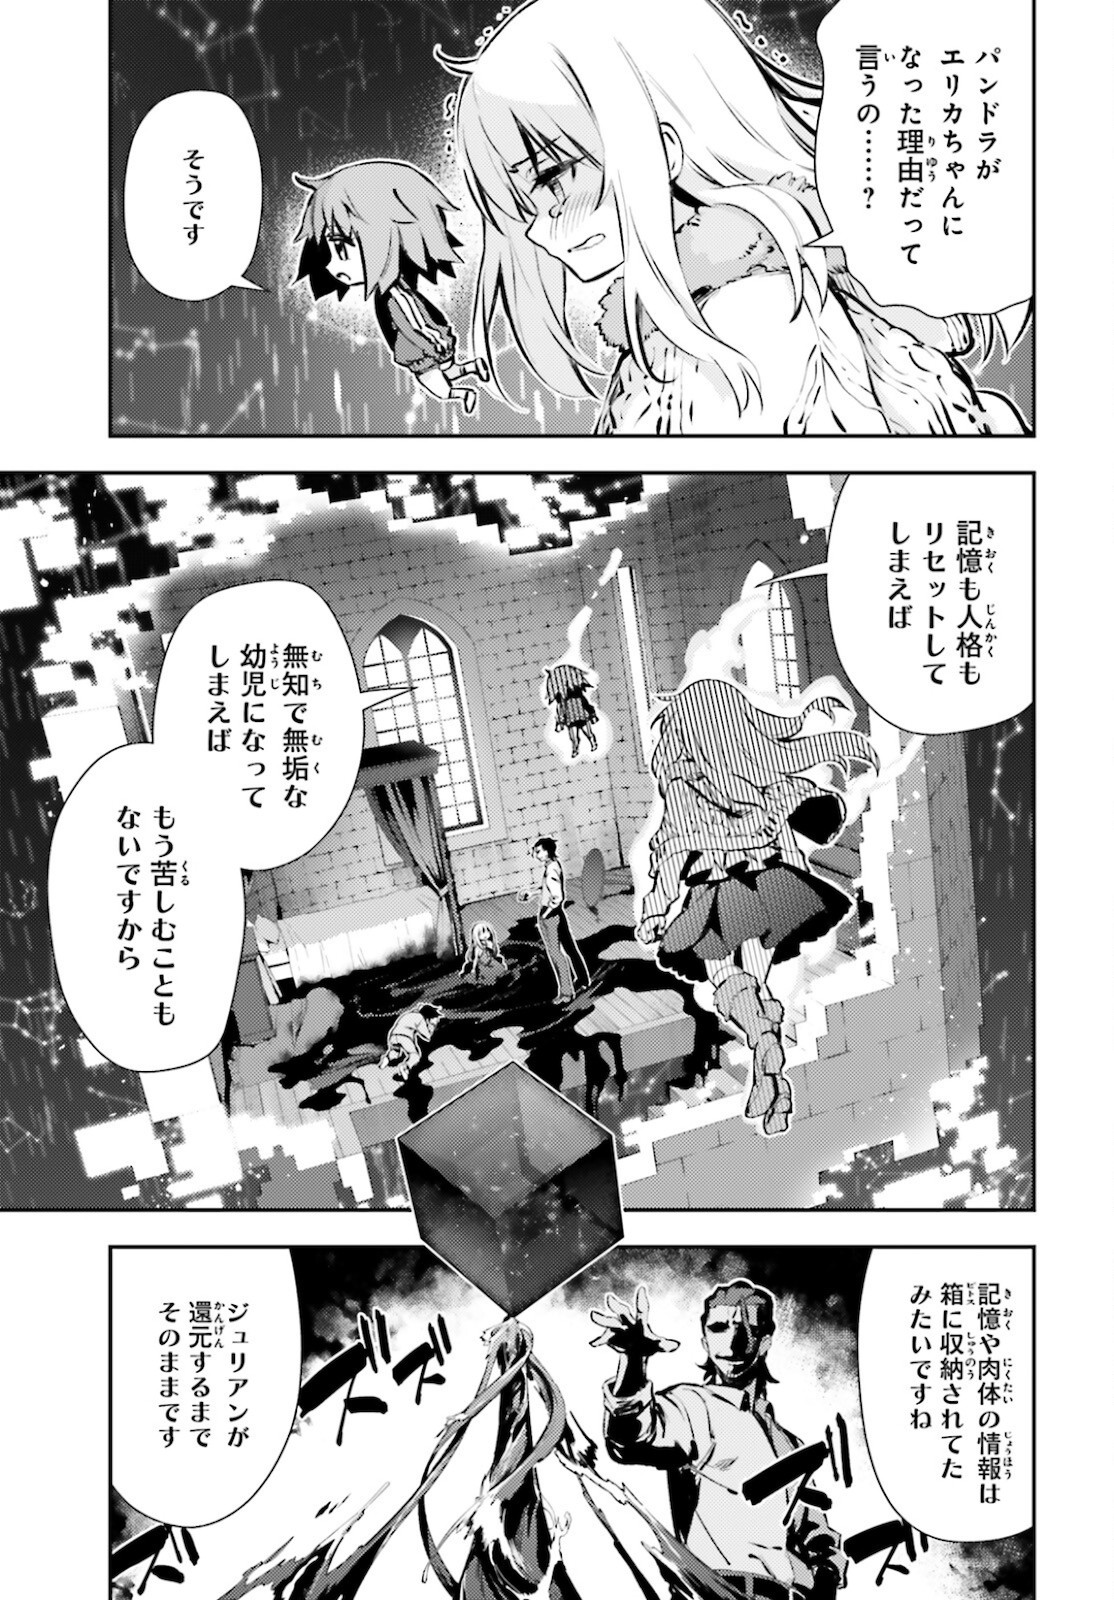 Fate/Kaleid Liner Prisma Illya Drei! - Chapter 63 - Page 13